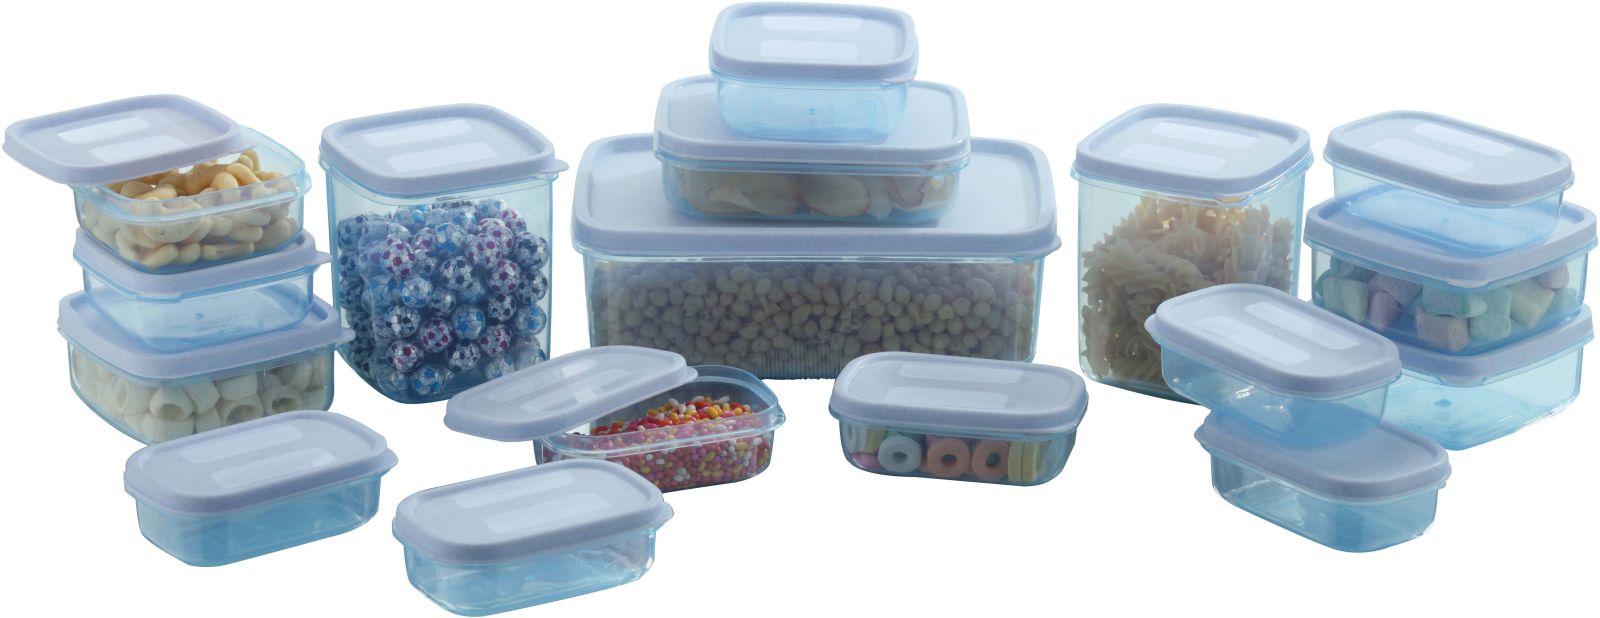 Flipkart: Buy MasterCook – Plastic Grocery Container (Pack of 17, Blue) at Rs 149 only